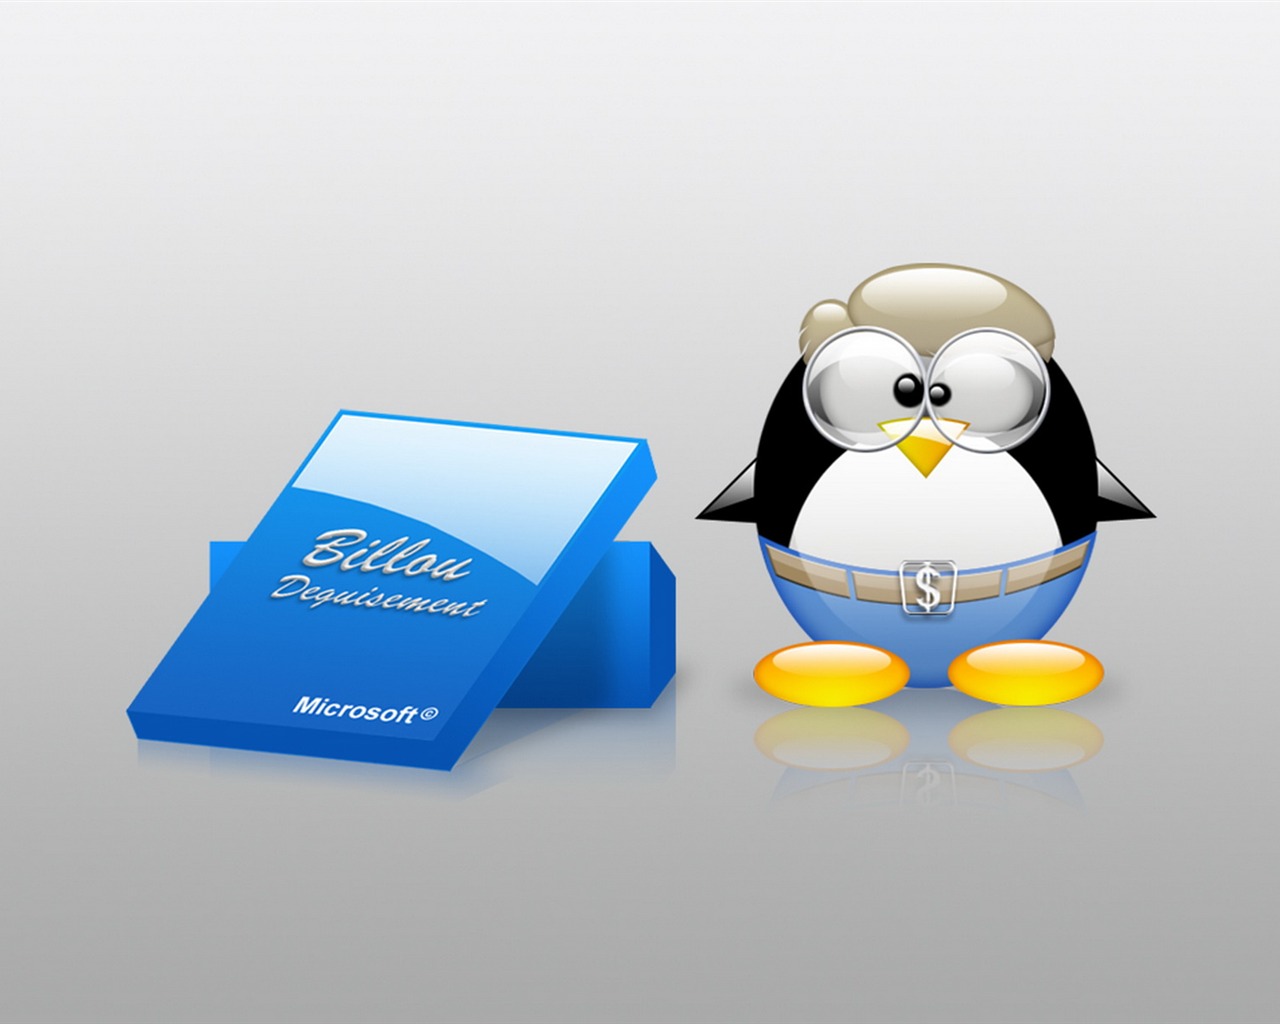 Linux tapety (2) #17 - 1280x1024